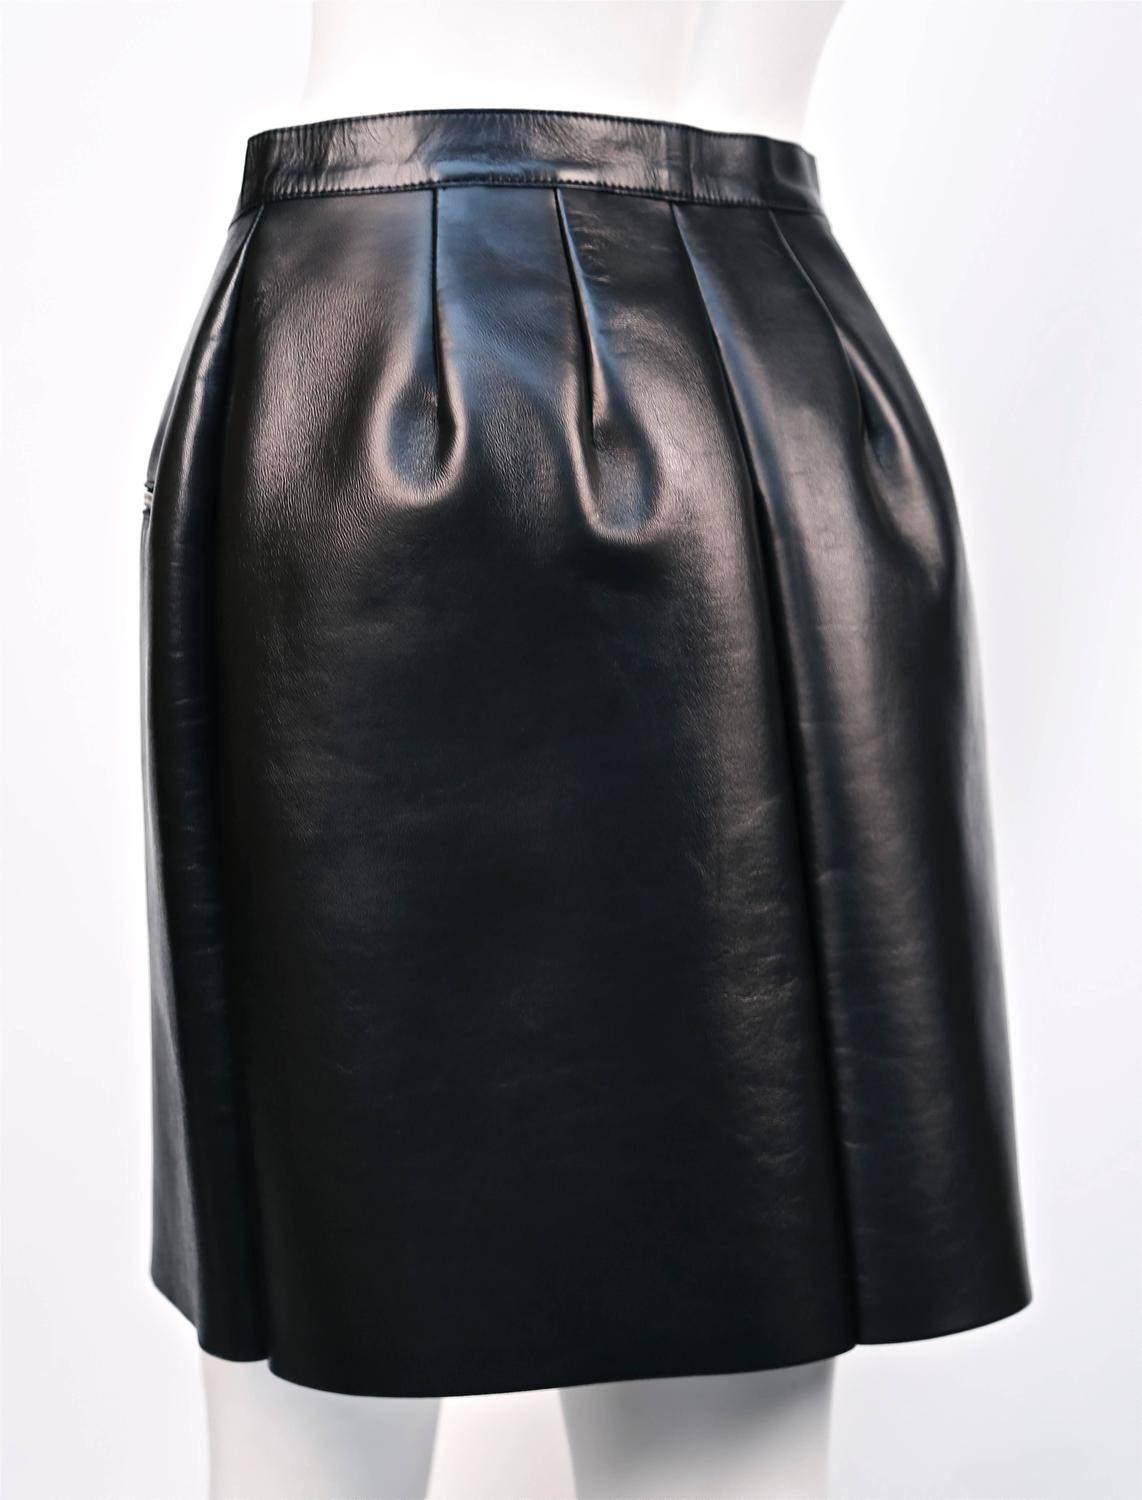 Jet black smooth leather skirt with silver zipper details designed by Phoebe Philo for Celine. French size 38. Approximate measurements: waist 29”, Hip 38”, Length 19”.  Zipper at center front with snap closure at waist. Made in Italy. New with